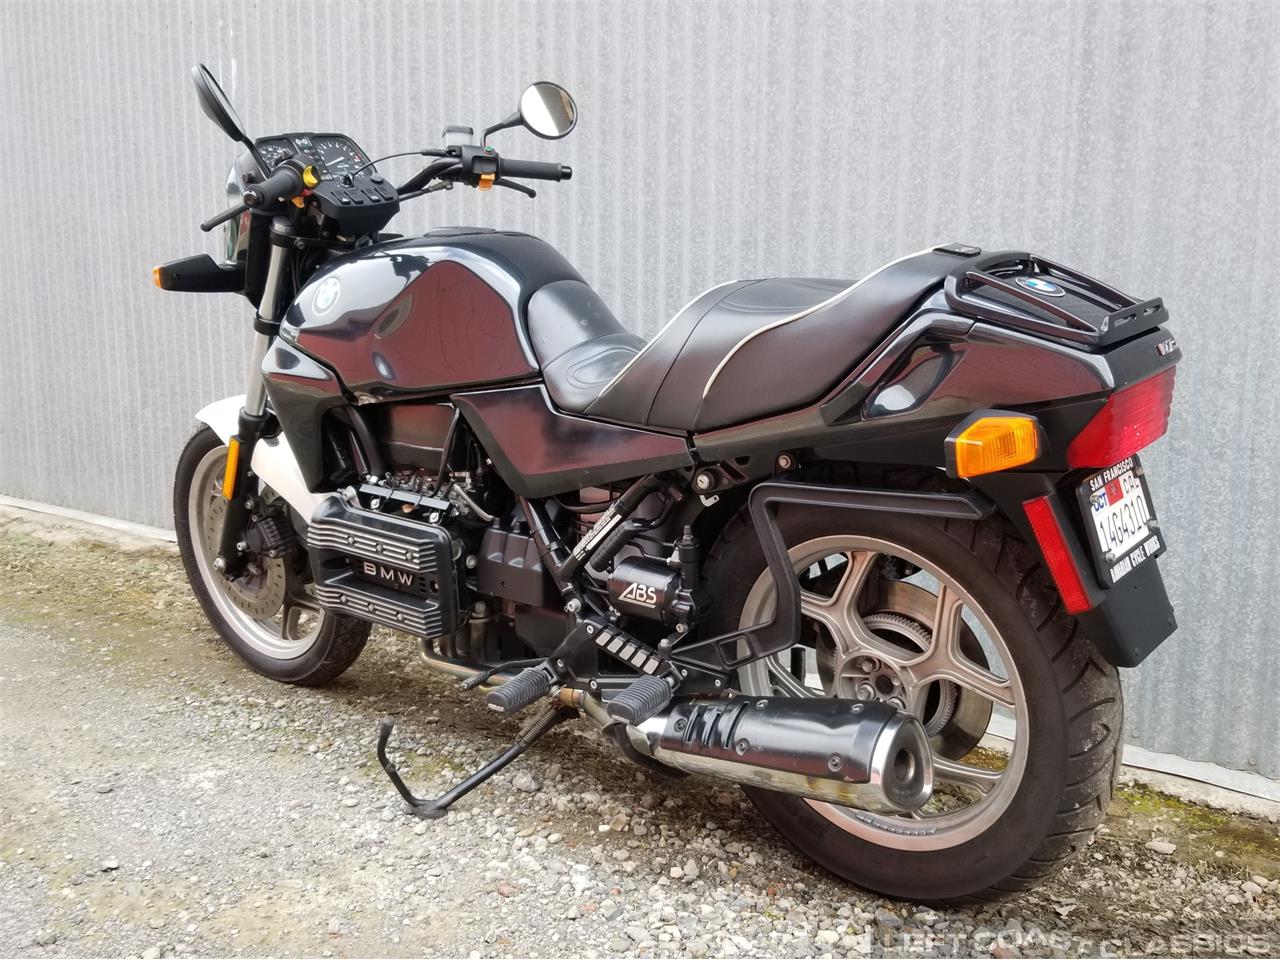 1993 BMW Motorcycle for Sale | ClassicCars.com | CC-1208035